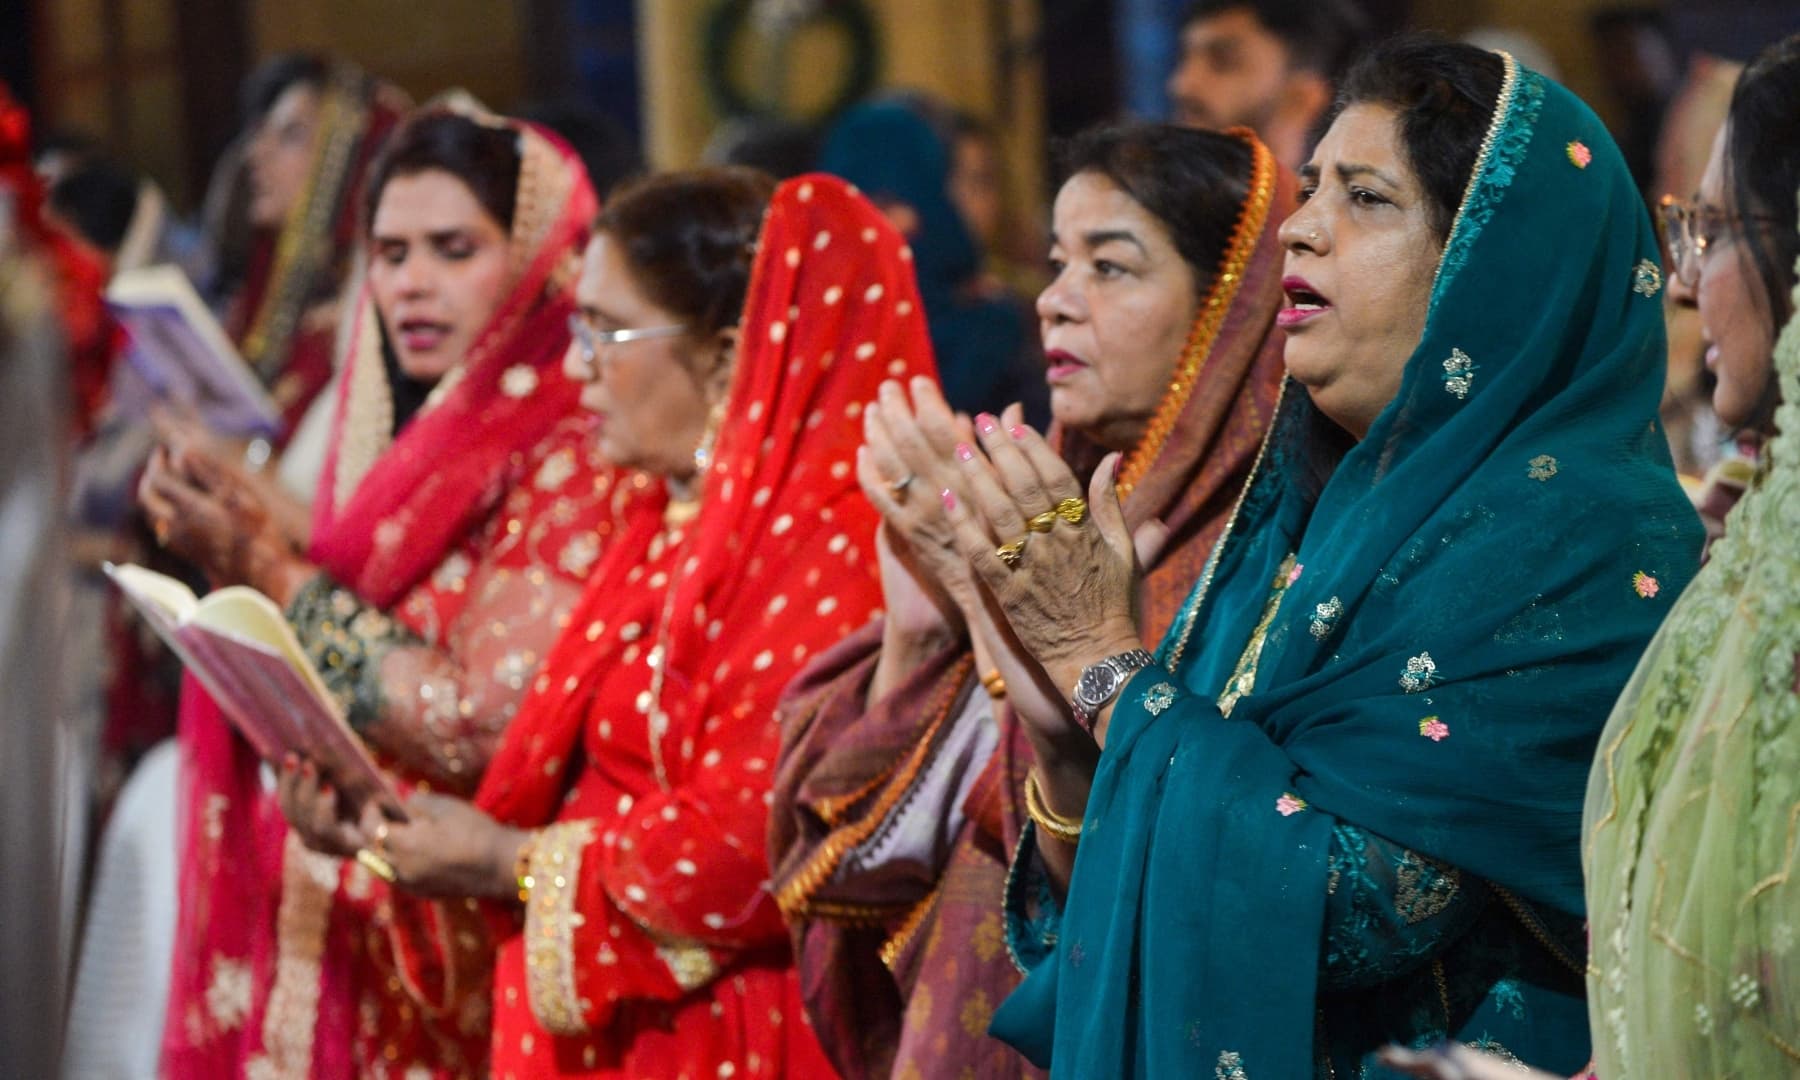 Christian devotees pray at Saint Andrew Church to celebrate Christmas in Karachi on December 24, 2021. — AFP